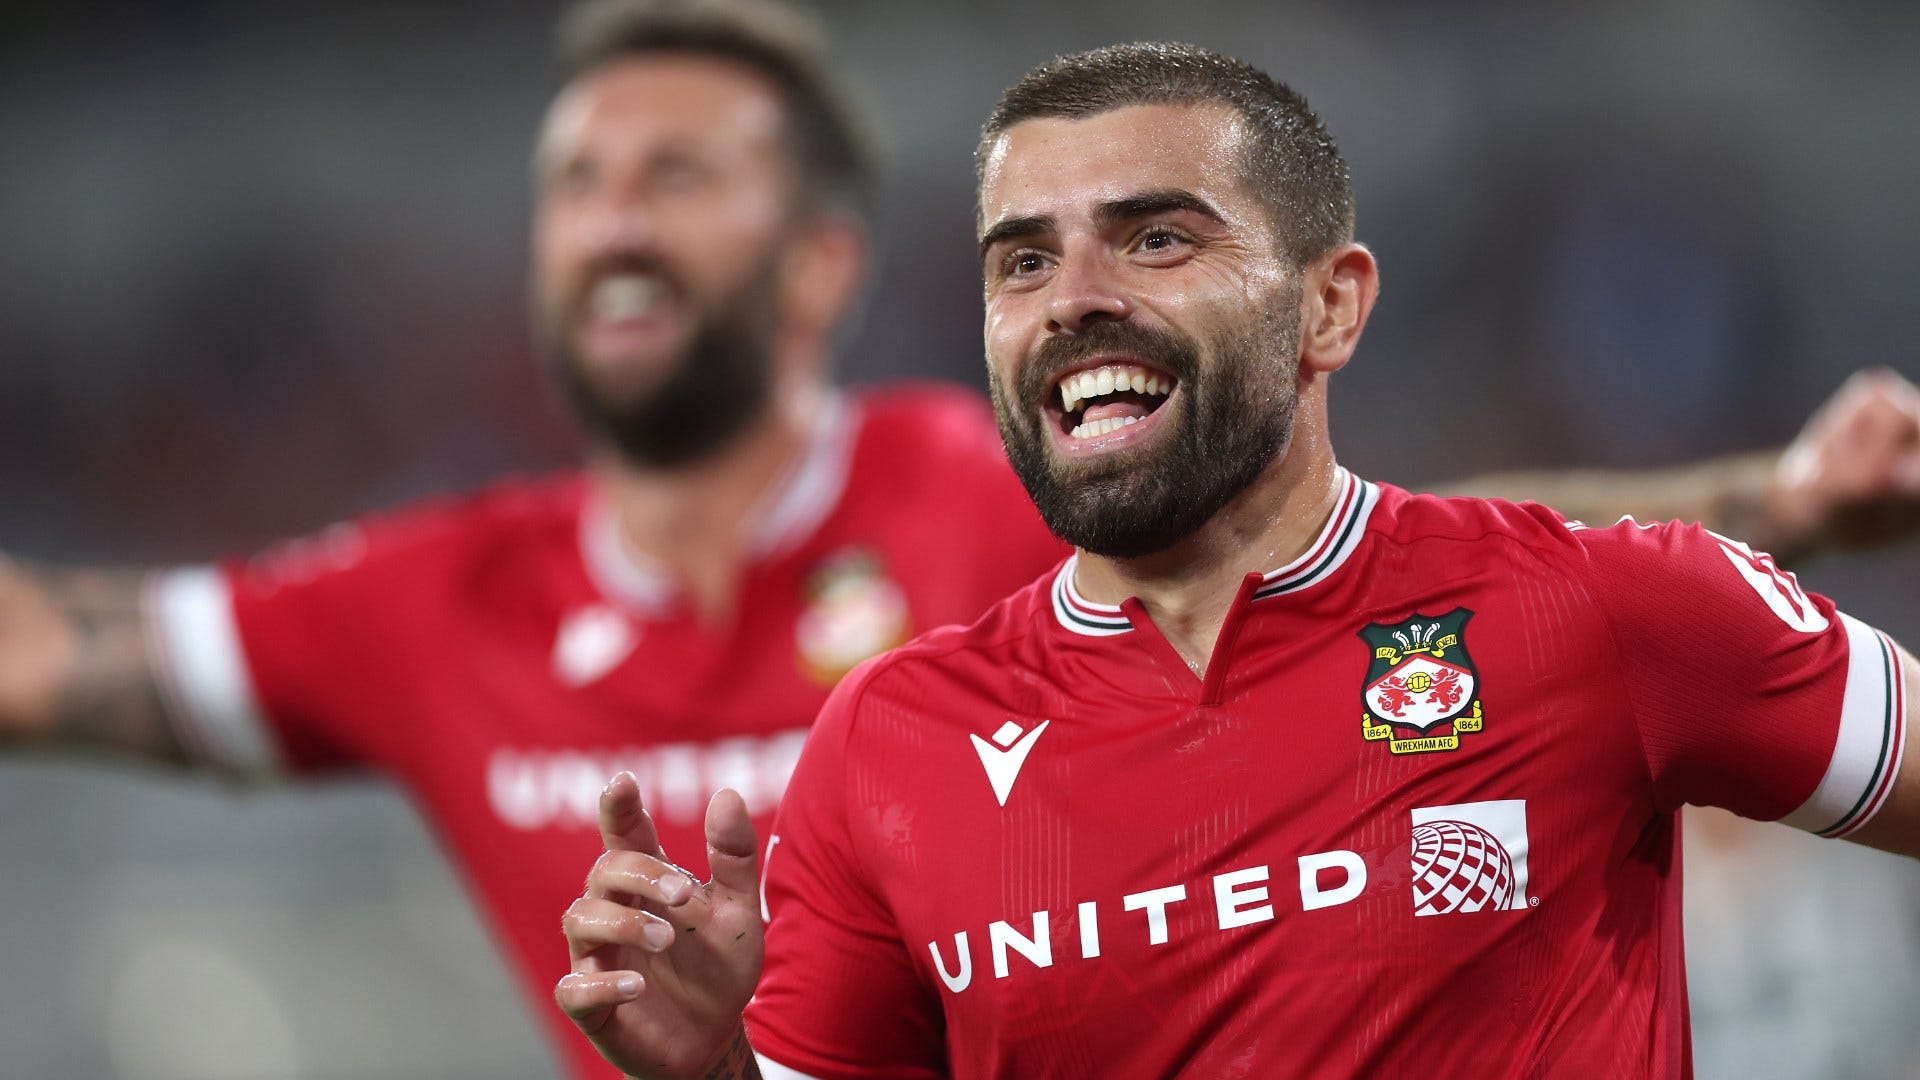 Wrexham vs Walsall Where to watch the match online, live stream, TV channels, and kick-off time Goal US